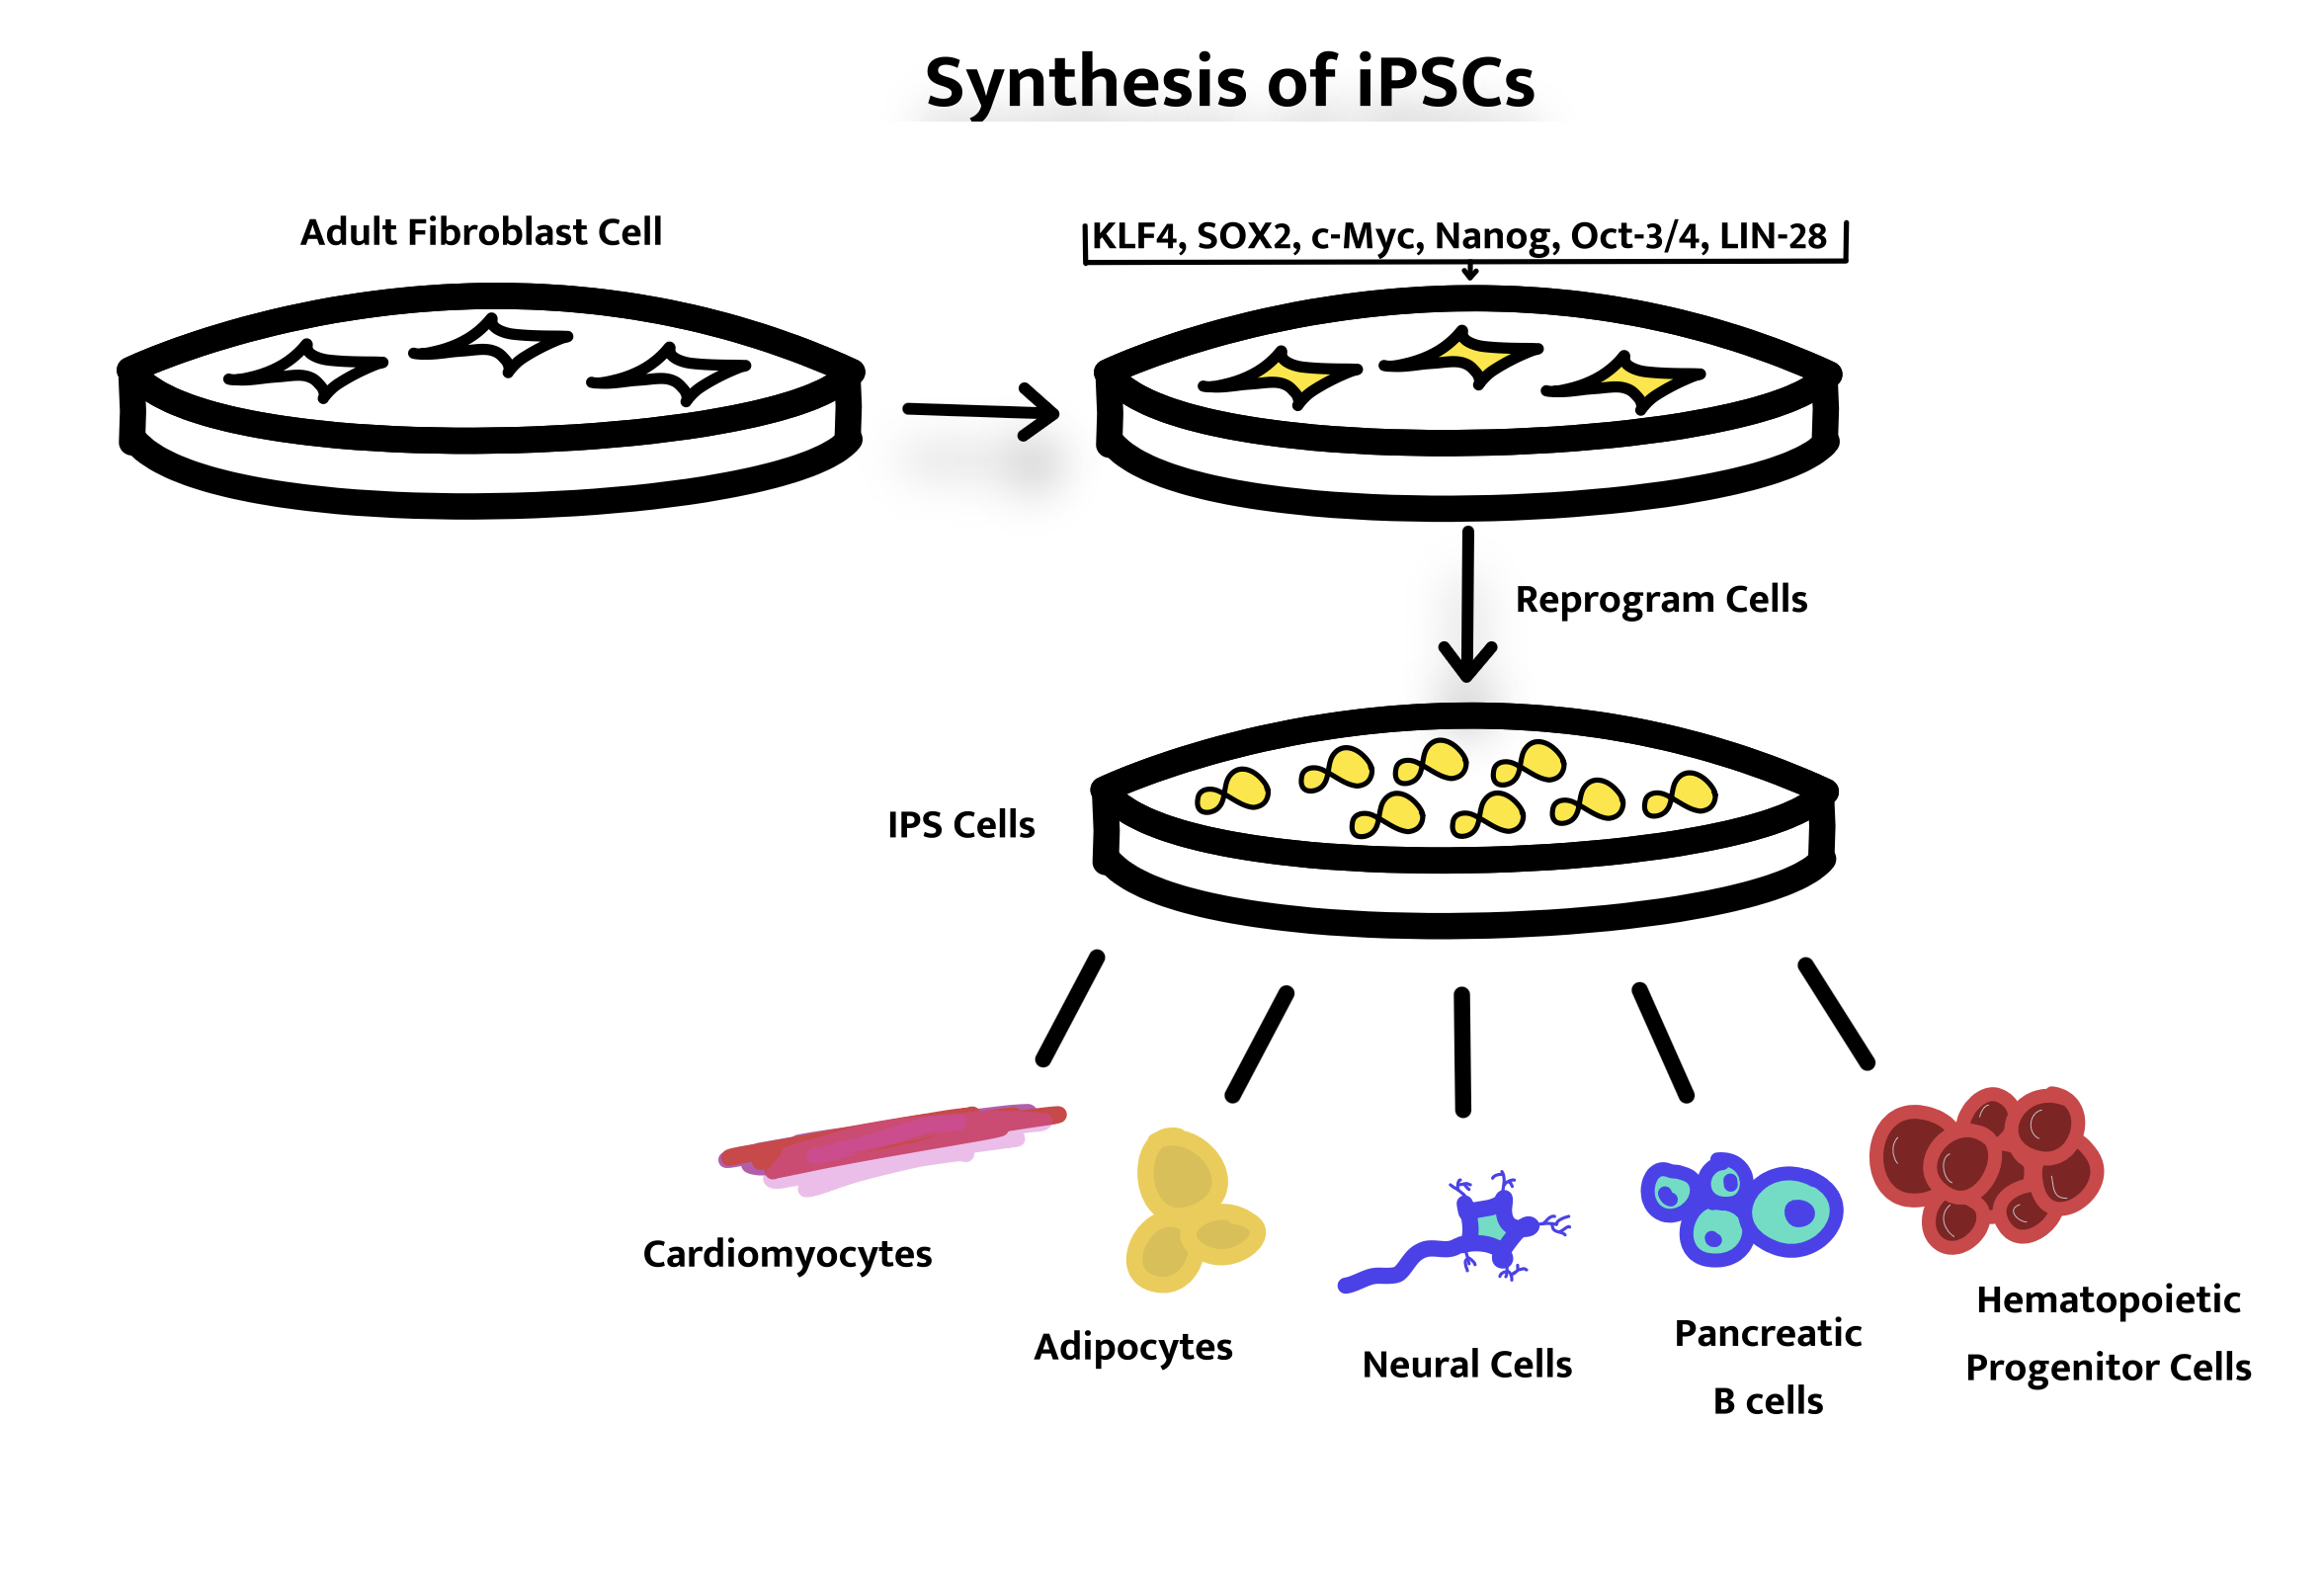 Synthesis of iPSCs